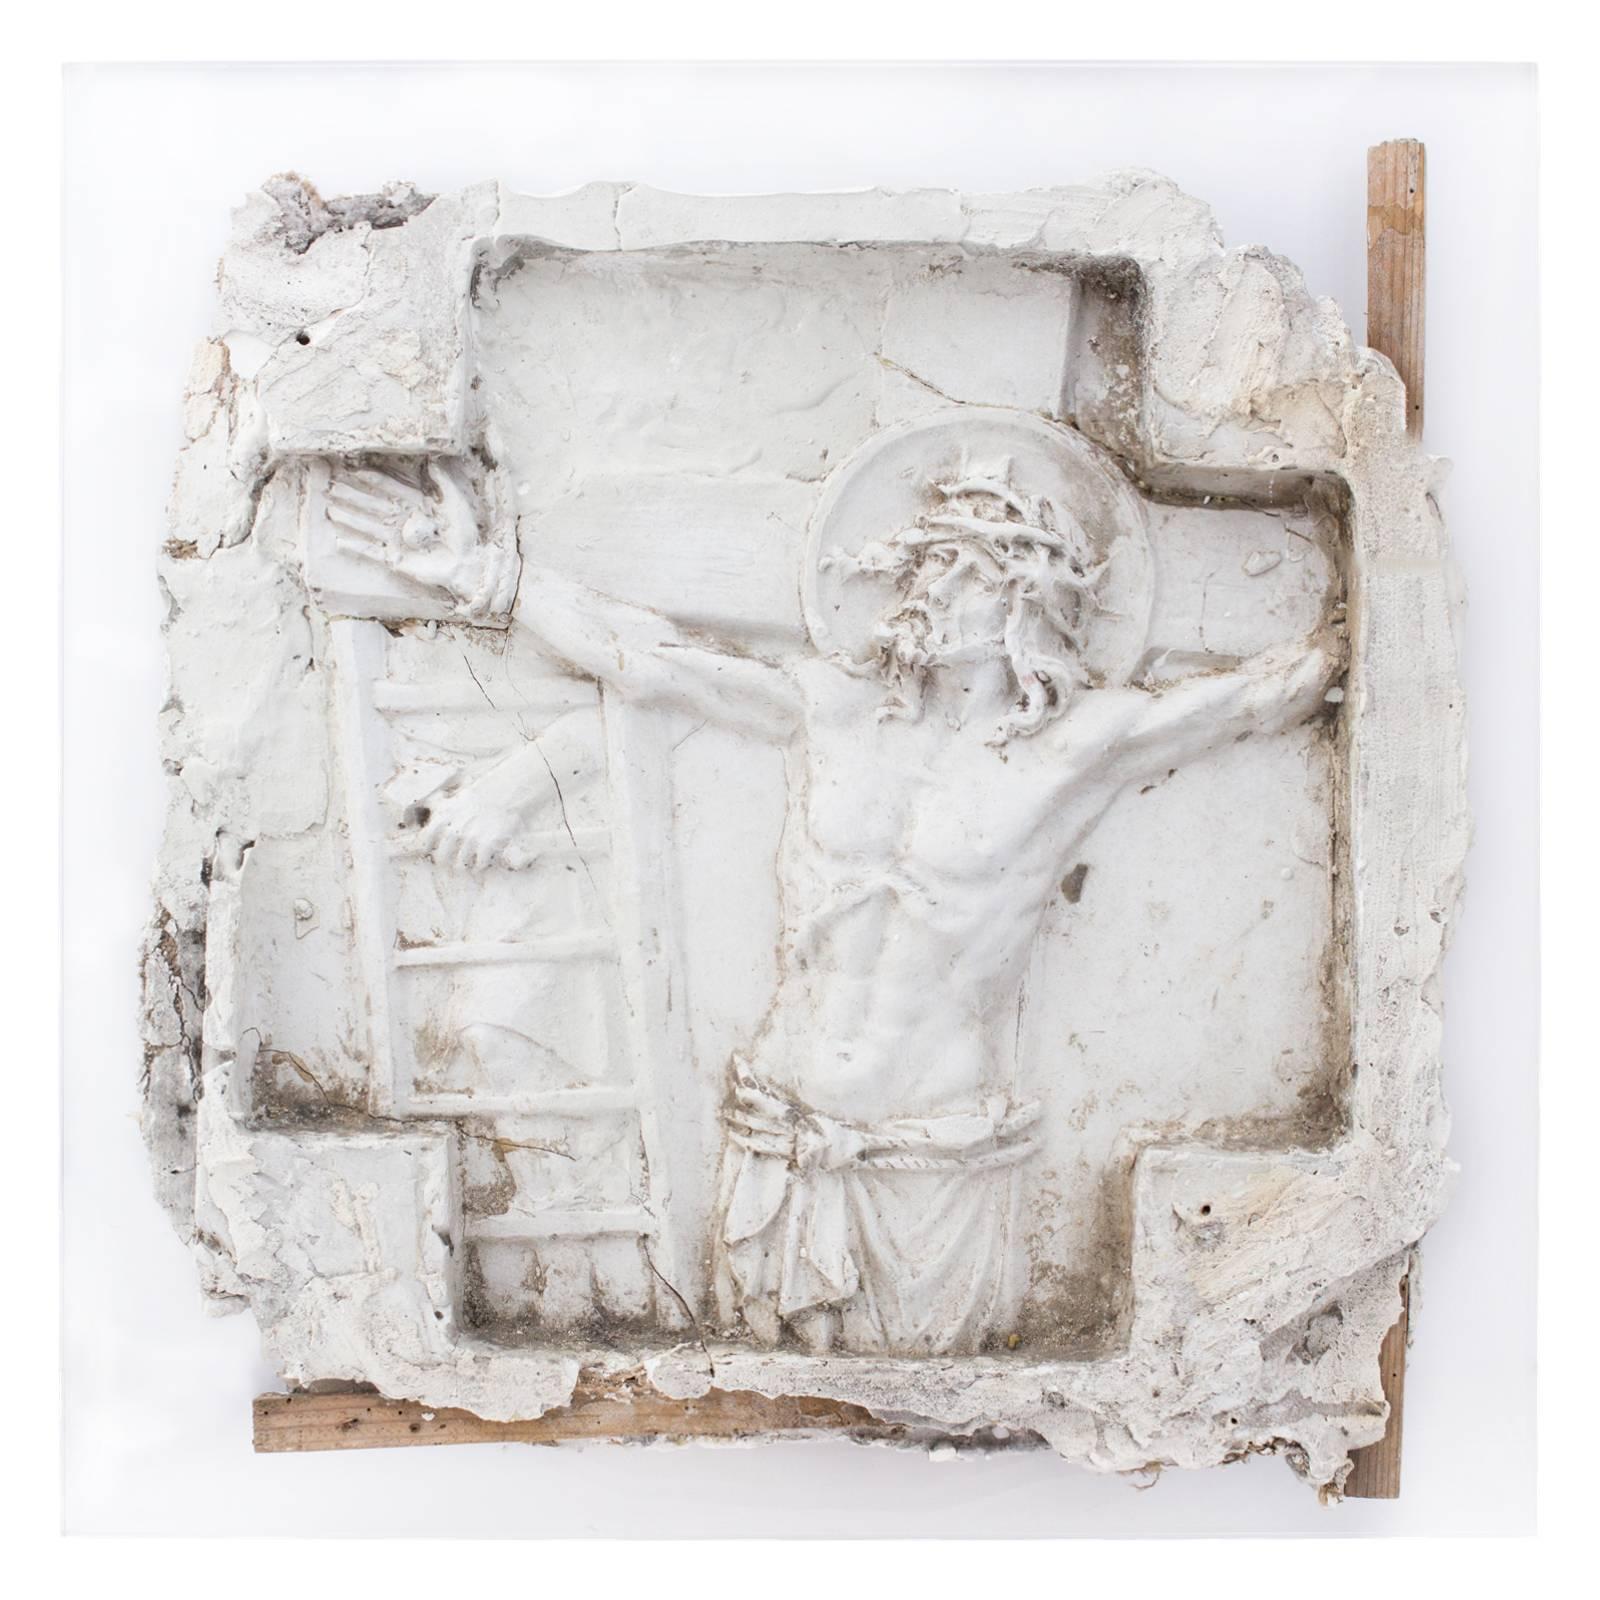 Truly a very special one of a kind religious piece, this large plaster relief features a representation of Christ and is believed to be a scene depicted from the stations of the cross and is believed to have originally been crafted in the early